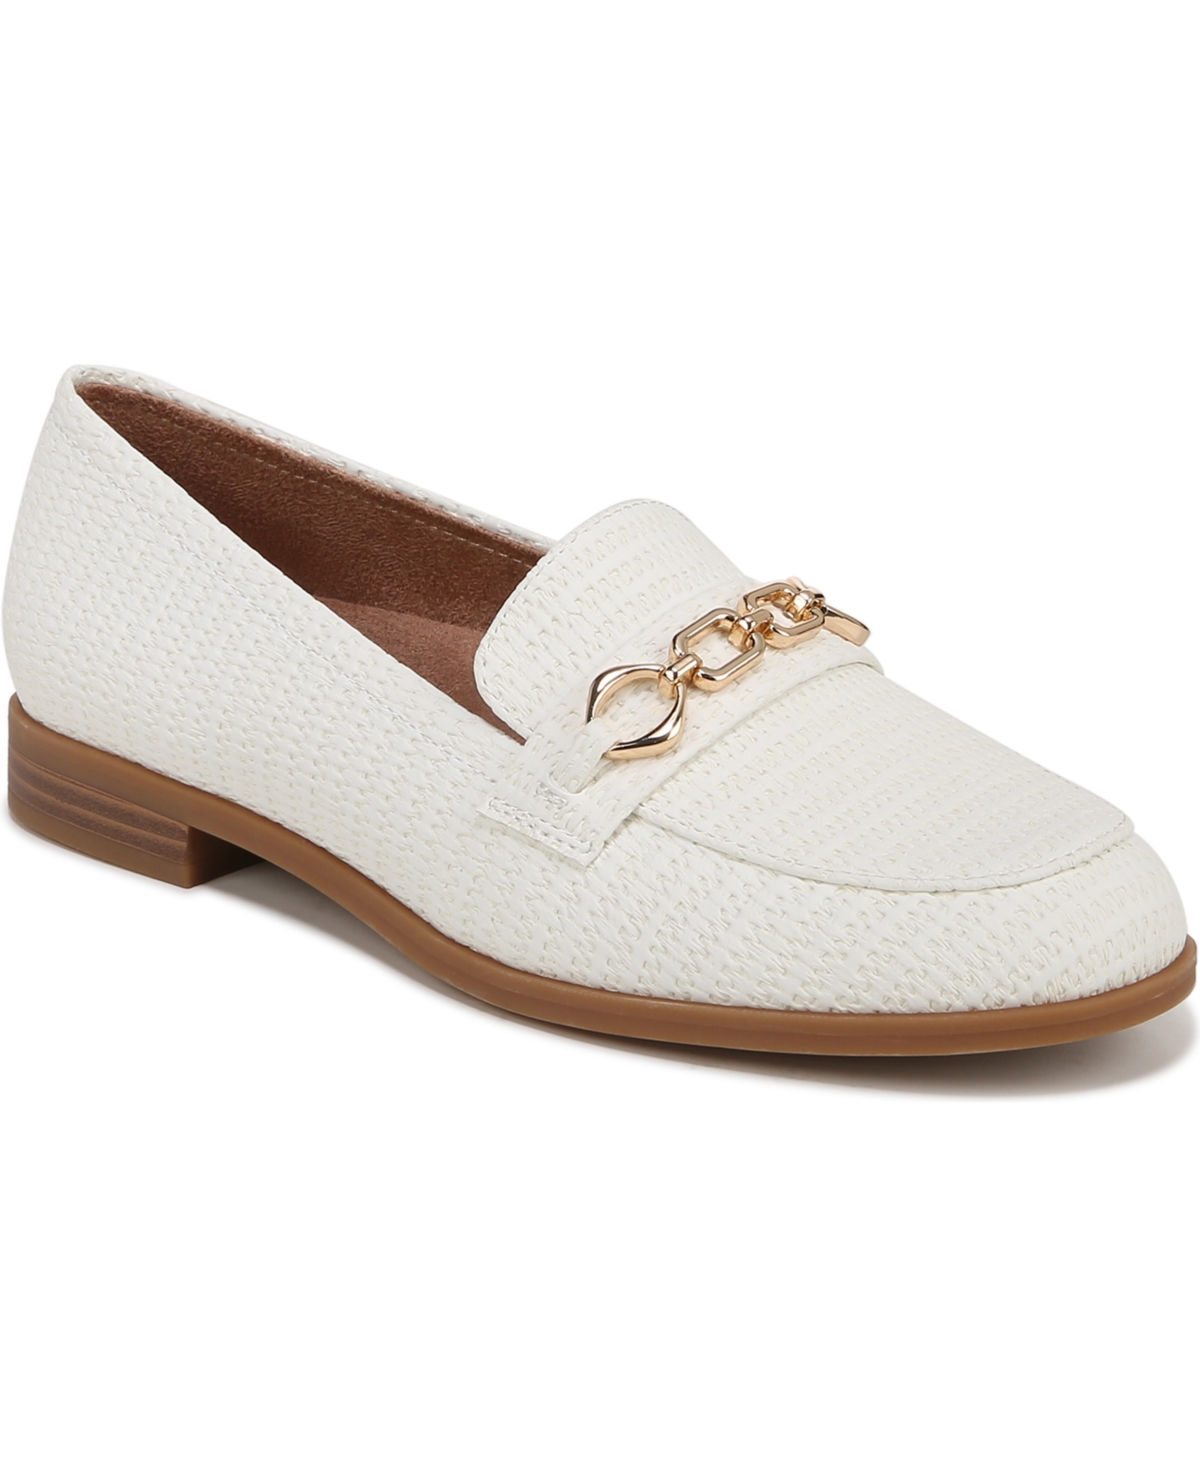 Mariana Loafers - White Woven Embossed Faux Leather